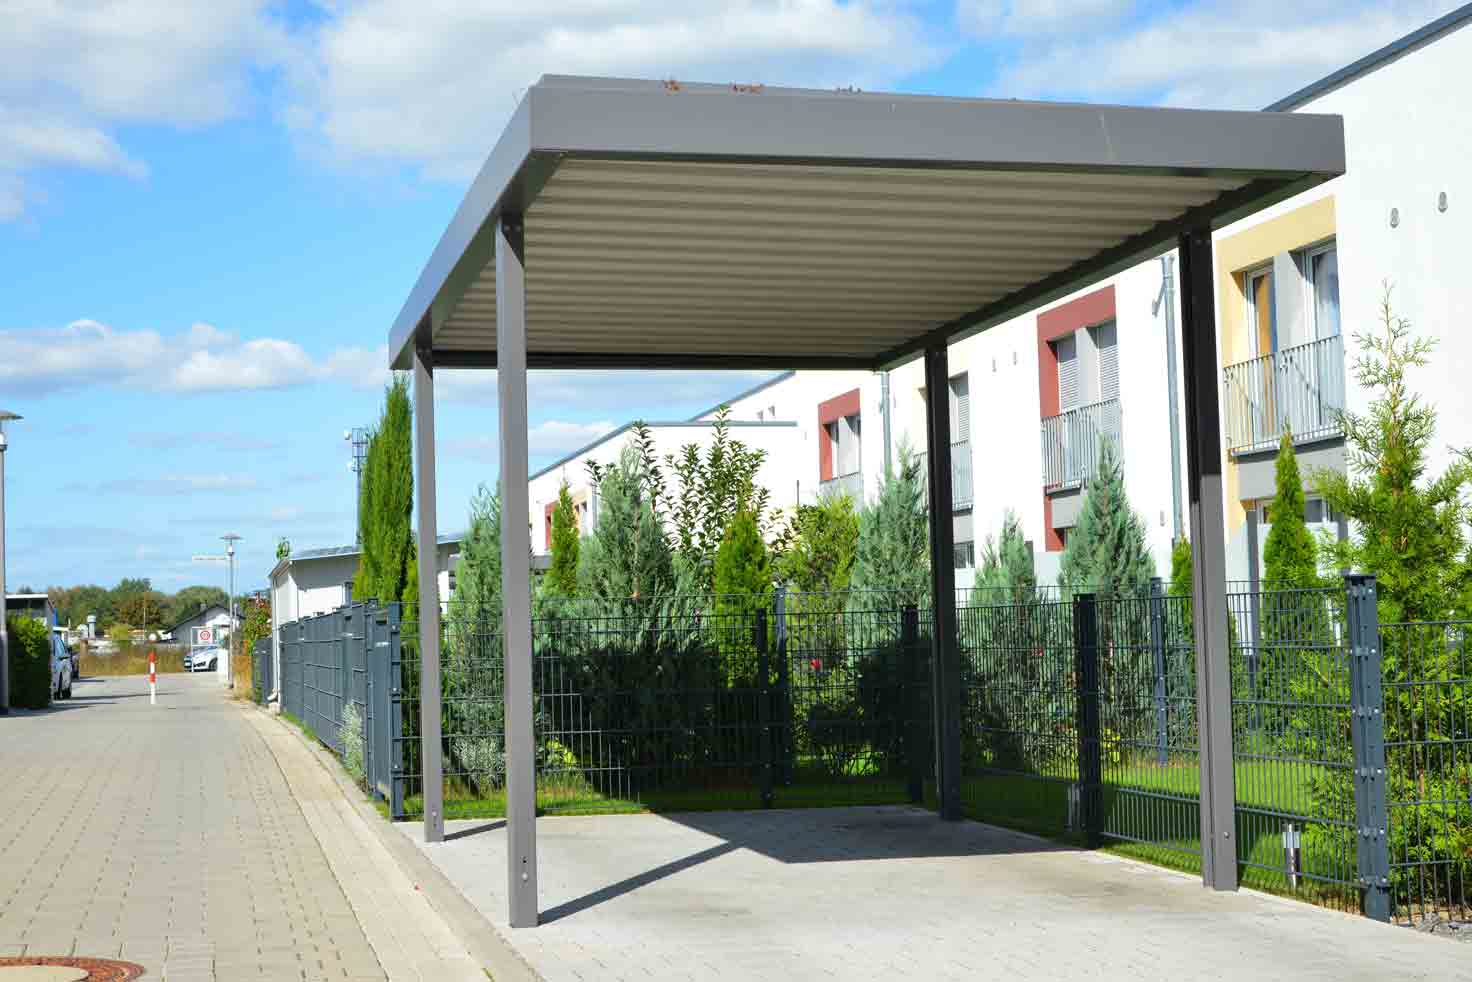 Steel Carport In Front Of A Residential Building